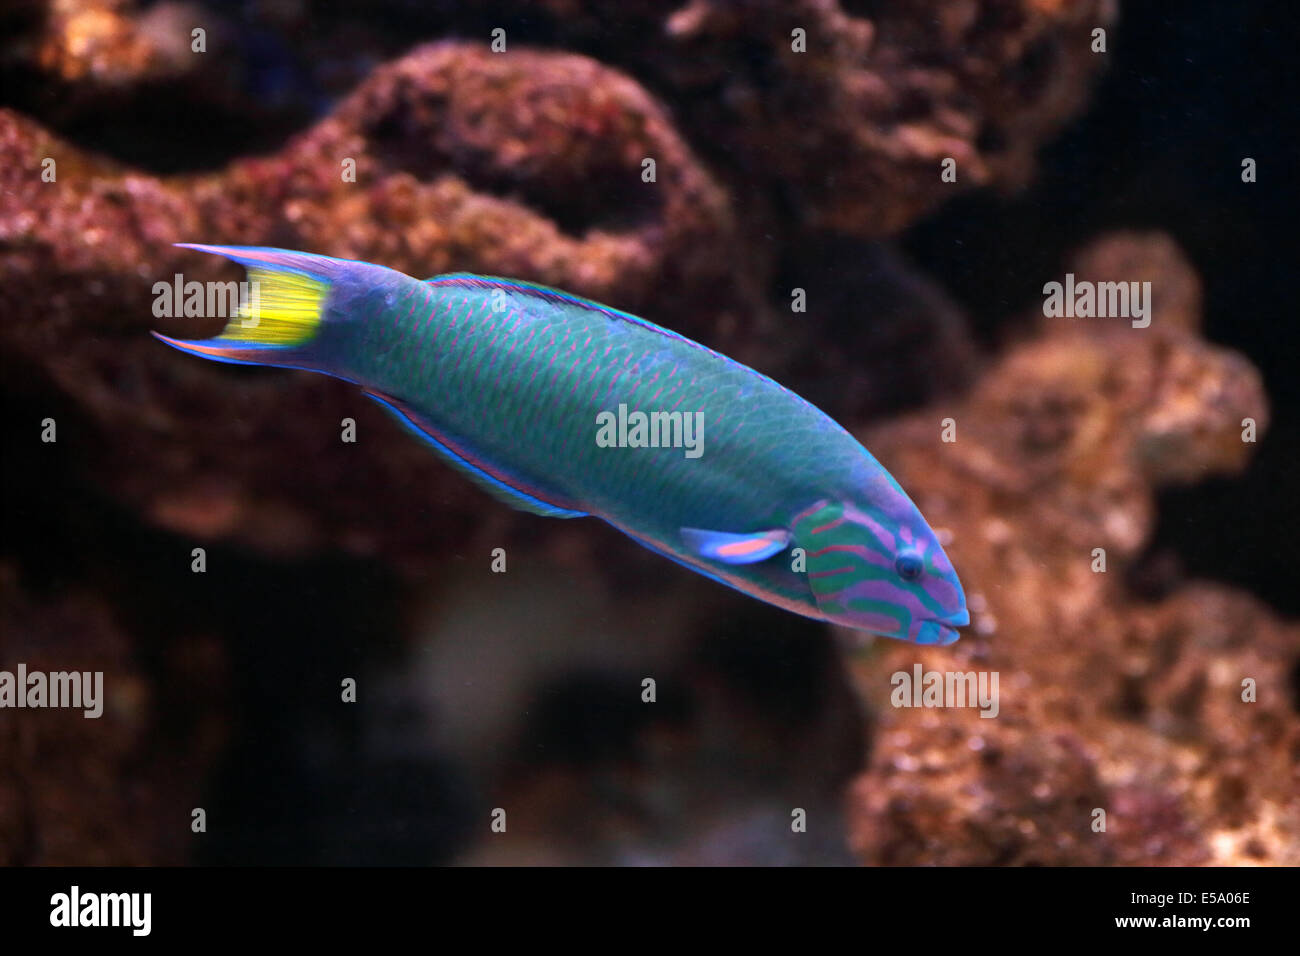 A moon wrasse, Thalassoma lunare, swimming in an aquarium. This colorful fish can be found on the coral reefs in the Indian and Stock Photo